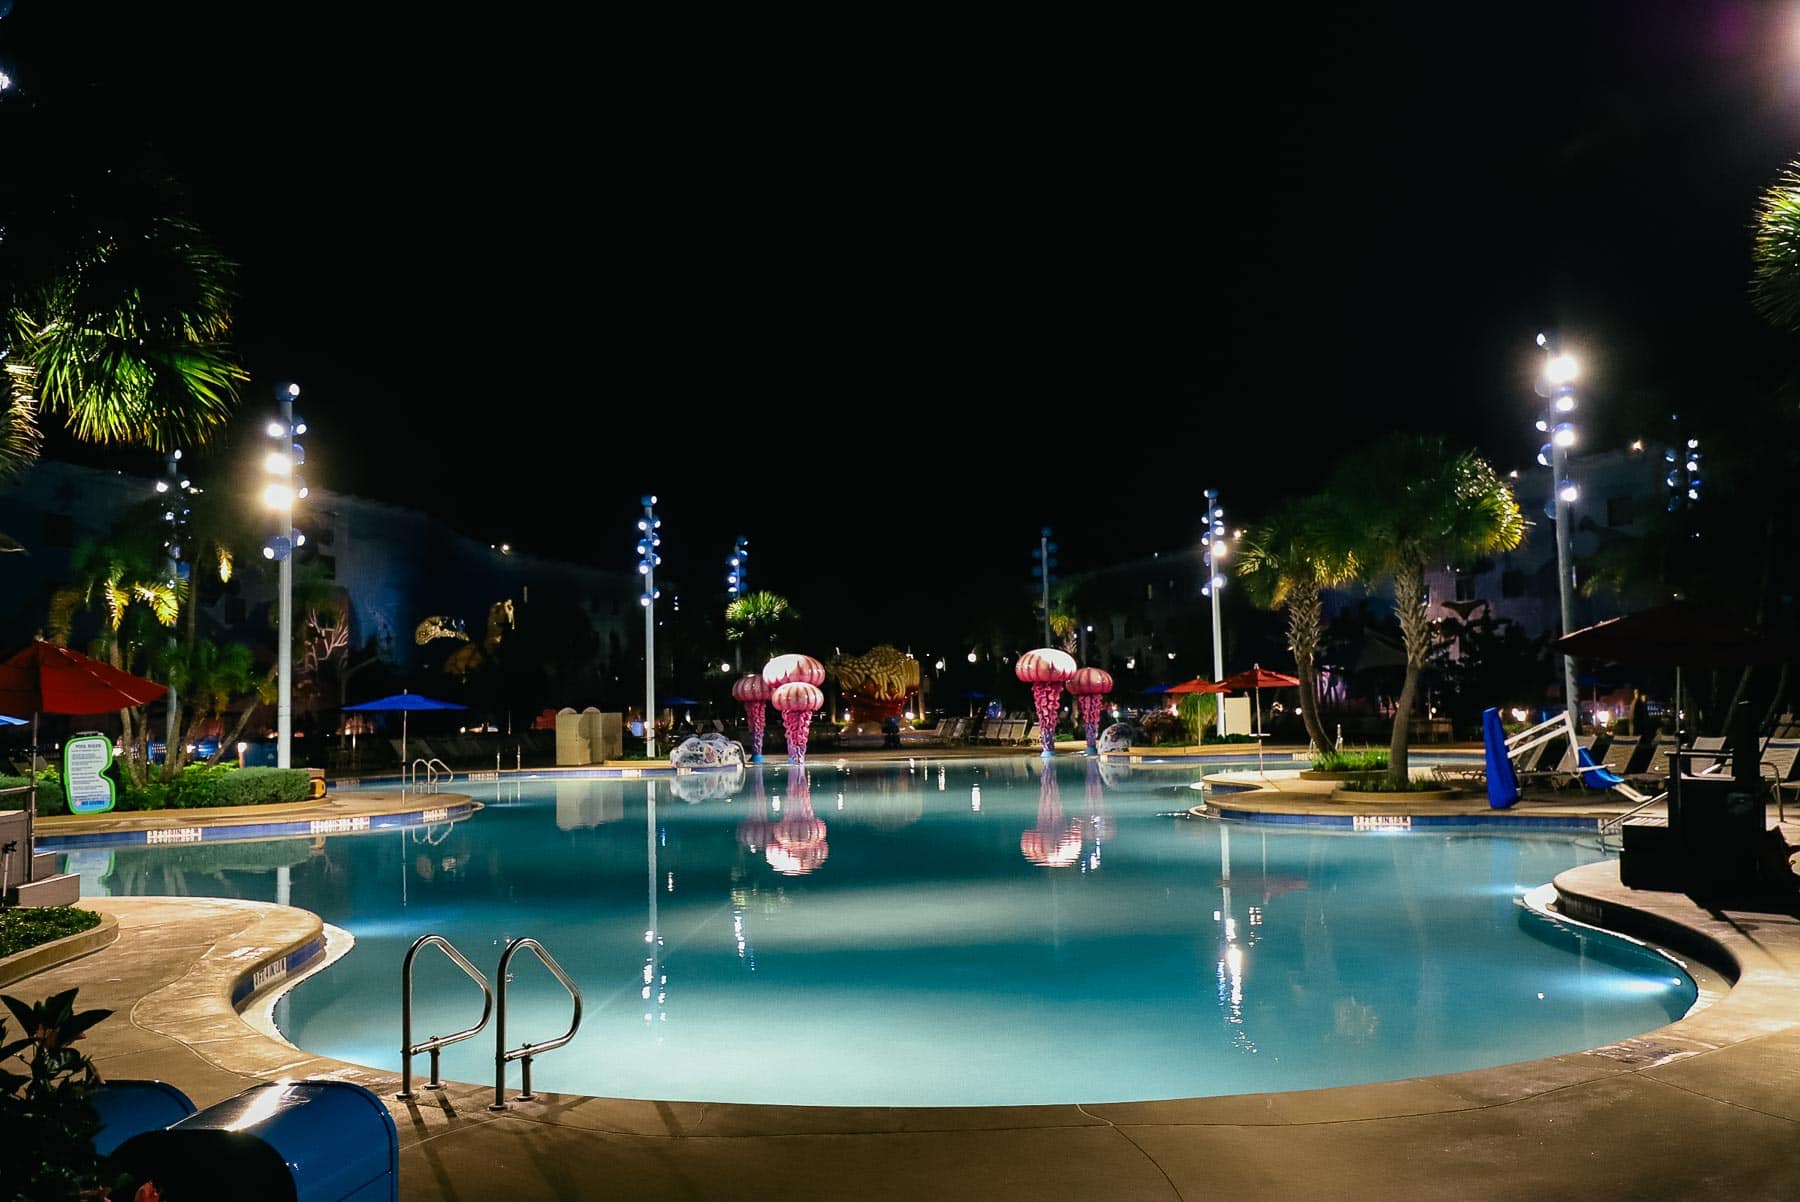 The Big Blue Pool at Art of Animation during the nighttime. 